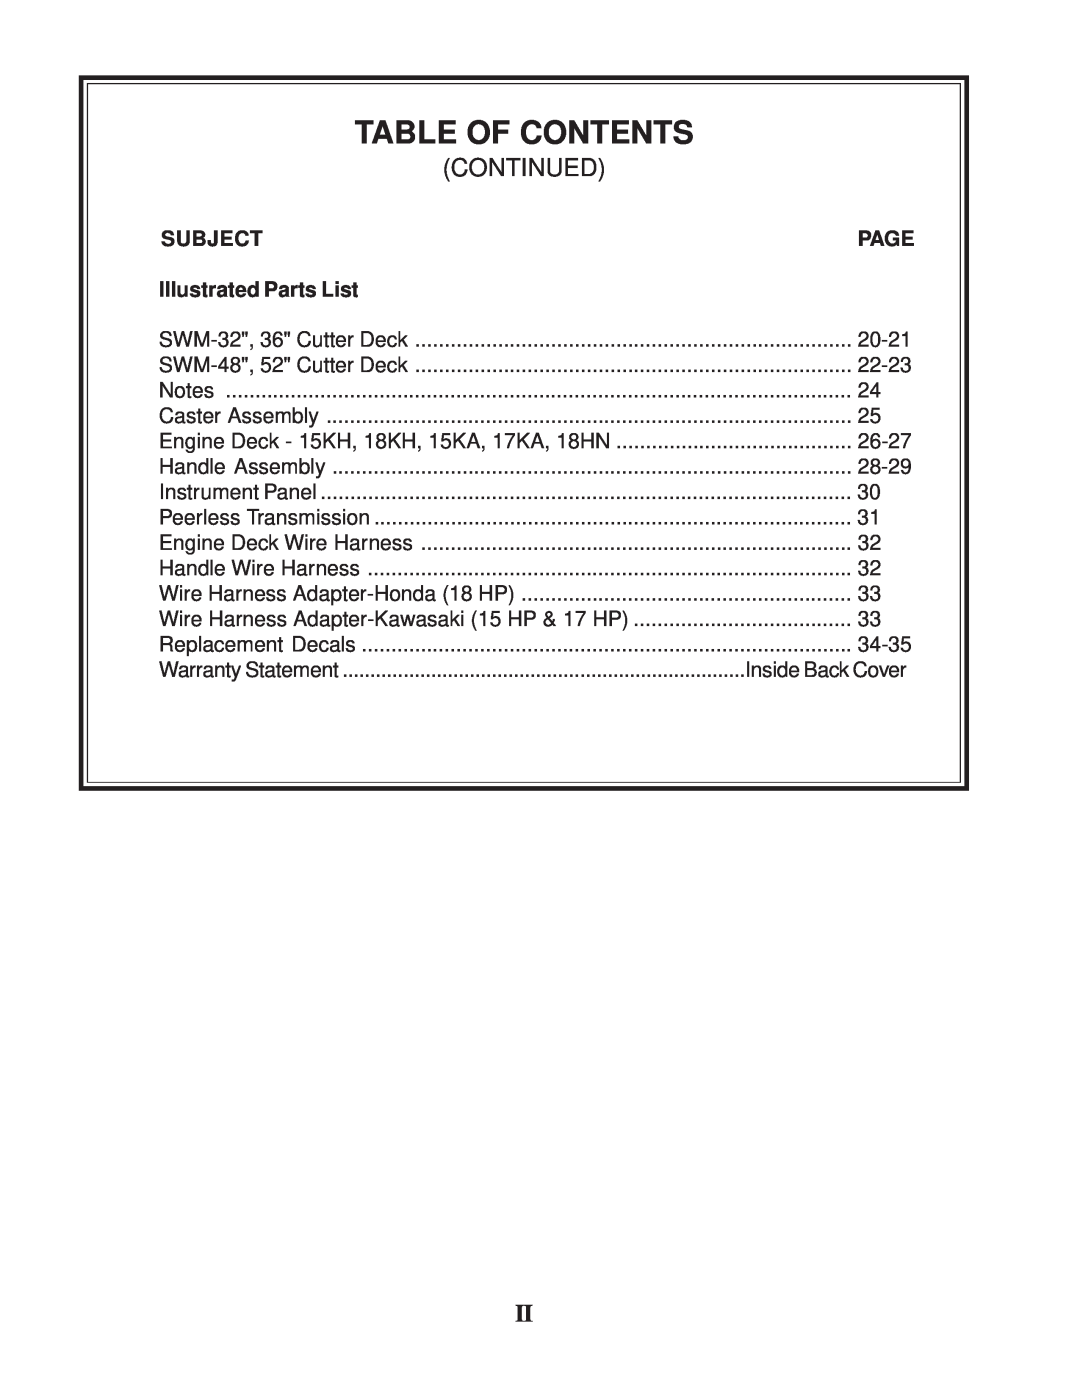 Scag Power Equipment SW manual Continued, Table Of Contents, Subject, Illustrated Parts List 